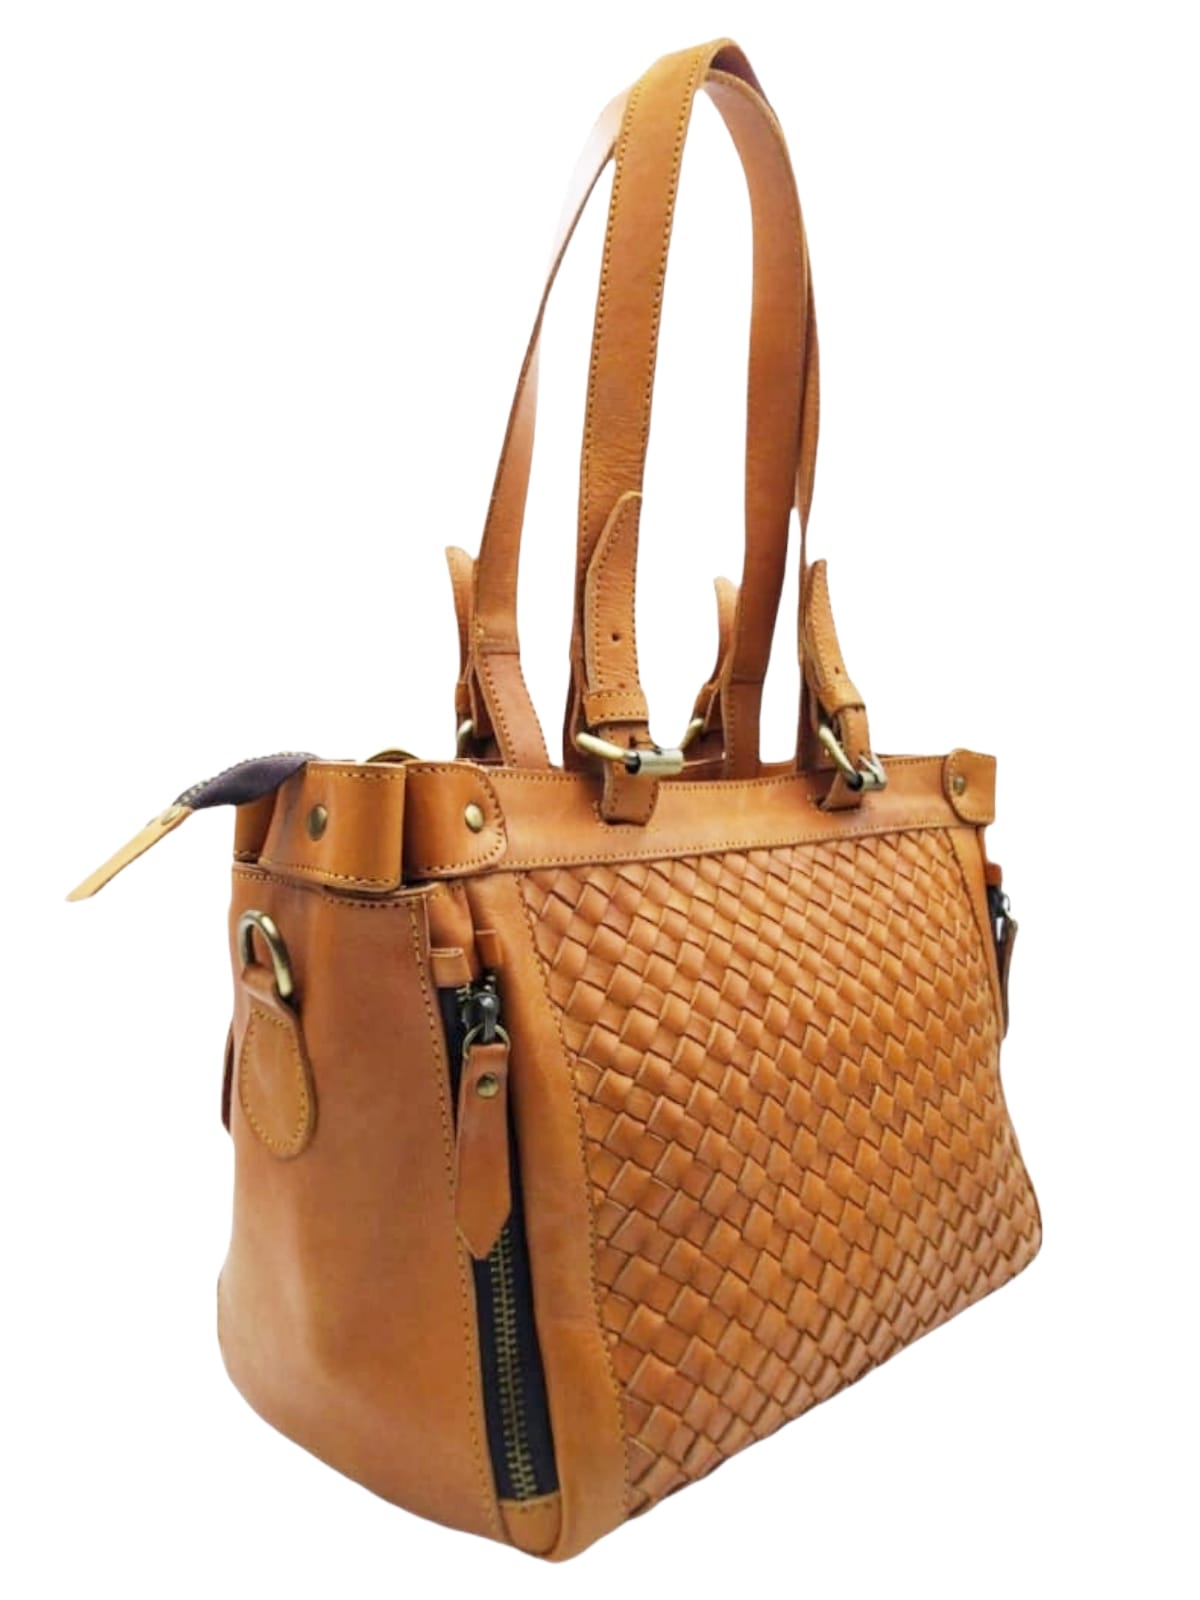 Filiana Woven Leather Bag by Lin's Craft Leather